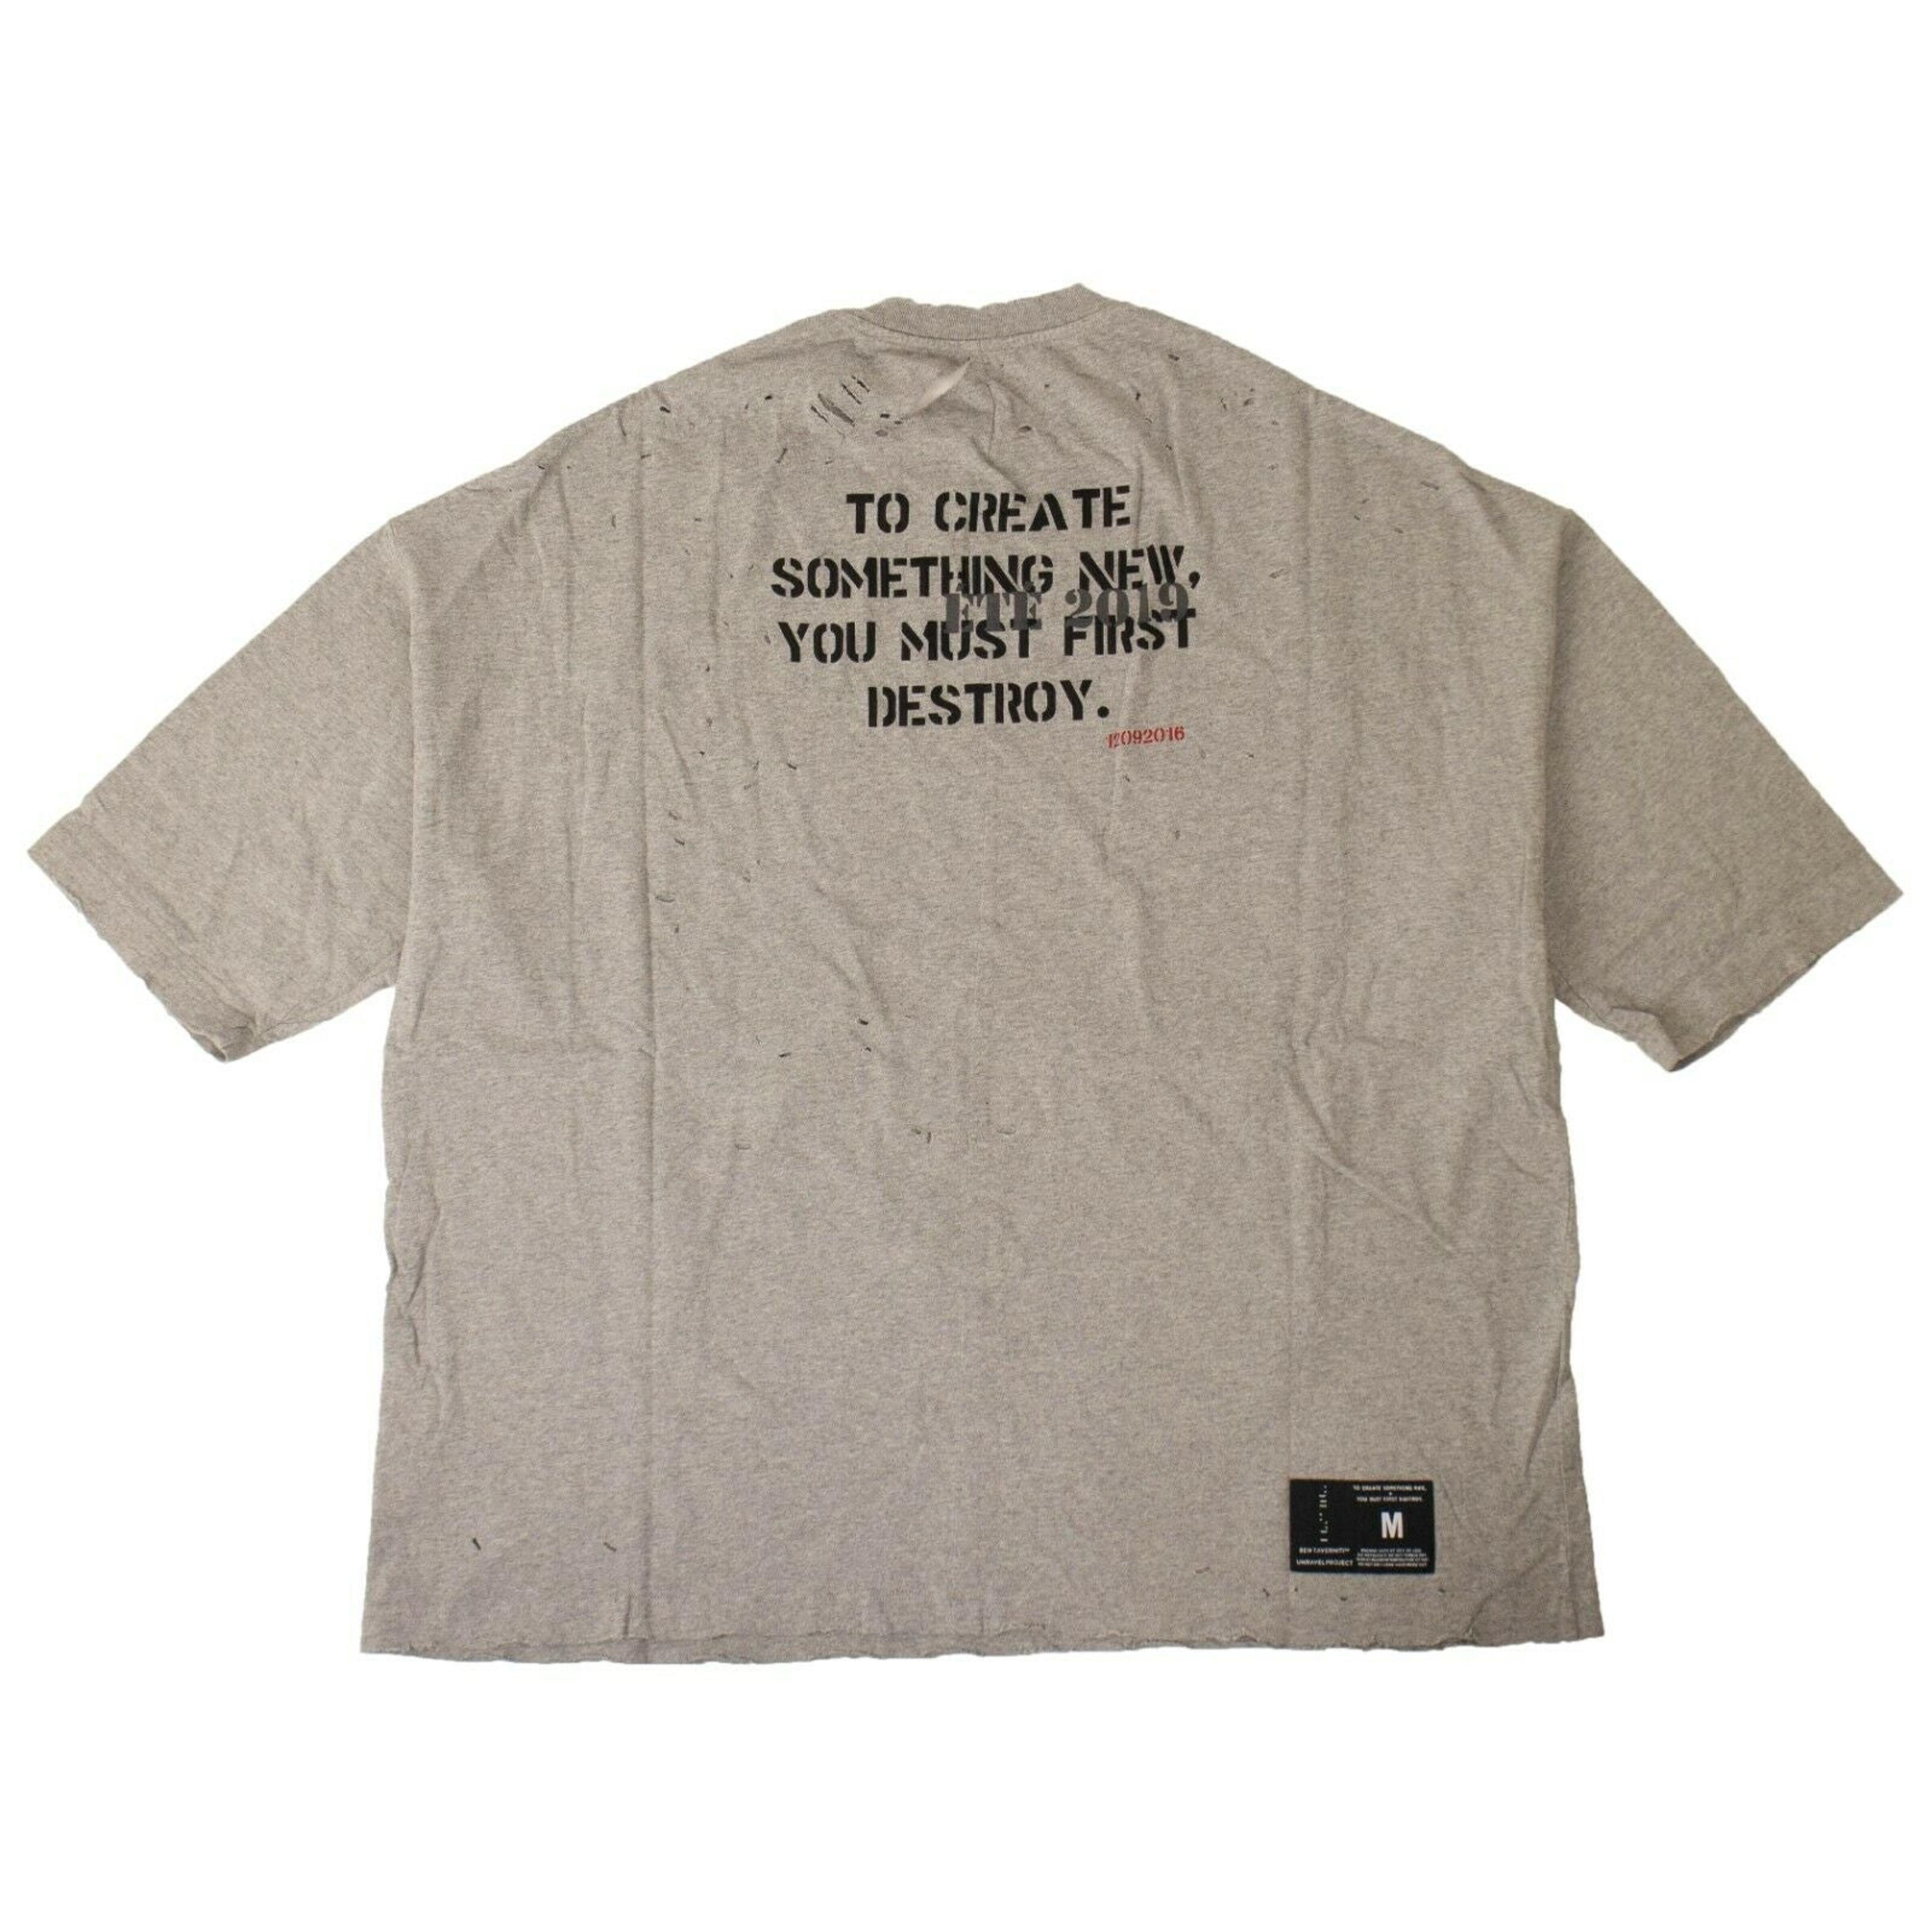 Alternate View 2 of Gray Distressed T-Shirt